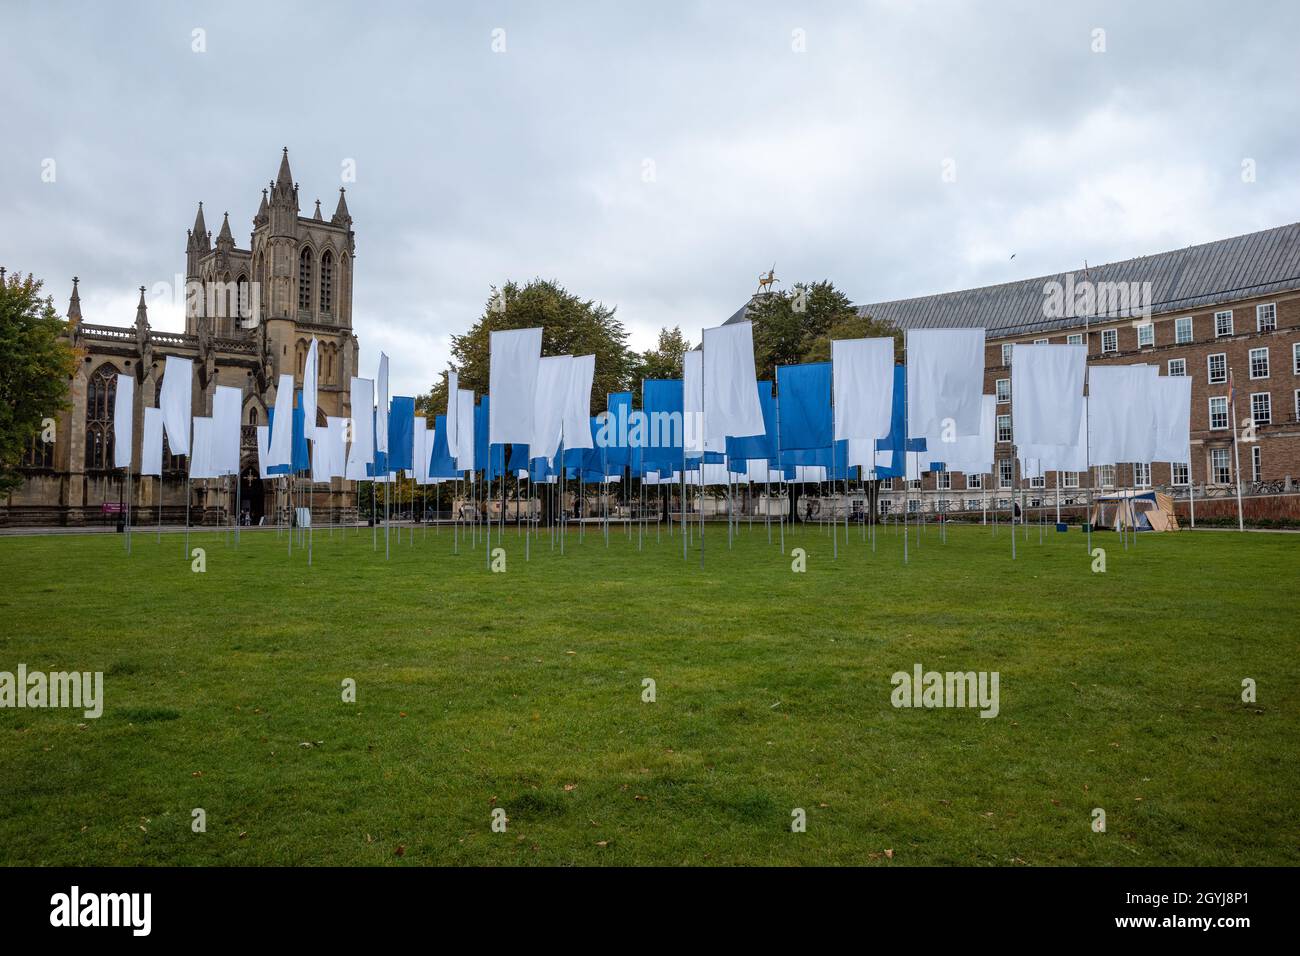 Memoriam artwork by Luke Jerram in College Green, Bristol. 100 NHS bedsheets arranged as a medical logo as a tribute to the brave NHS staff members Stock Photo